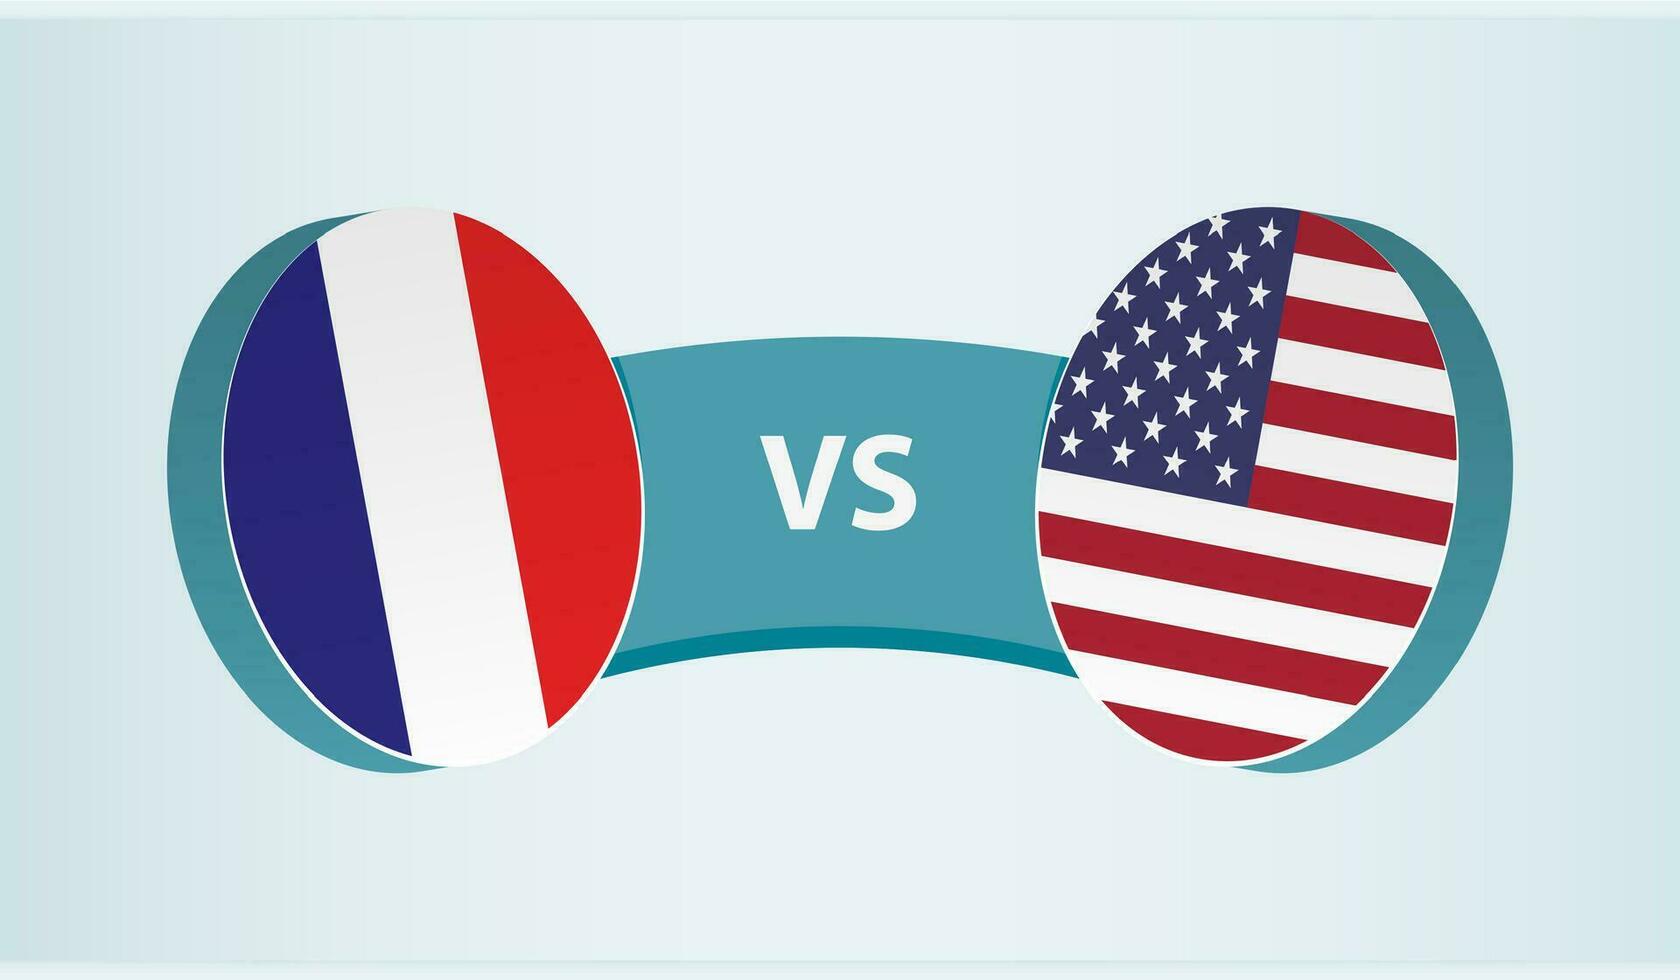 France versus USA, team sports competition concept. vector